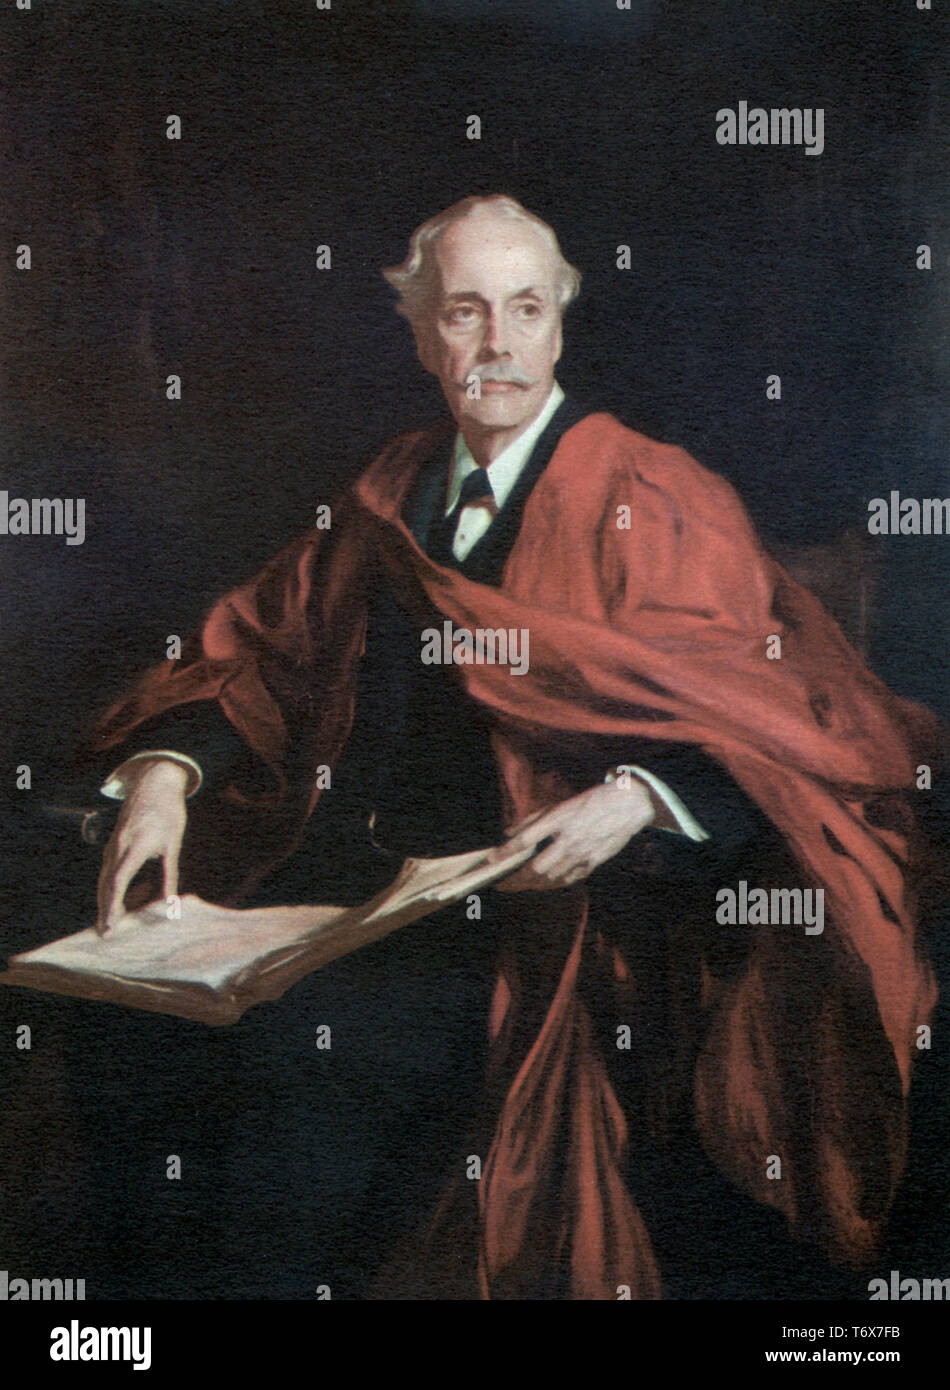 Arthur James Balfour, 1st Earl of Balfour (1848–1930). By Philip Alexius de László (1869–1937). Balfour was a British statesman and Conservative Party politician who served as Prime Minister  and Foreign Secretary of the United Kingdom. Stock Photo